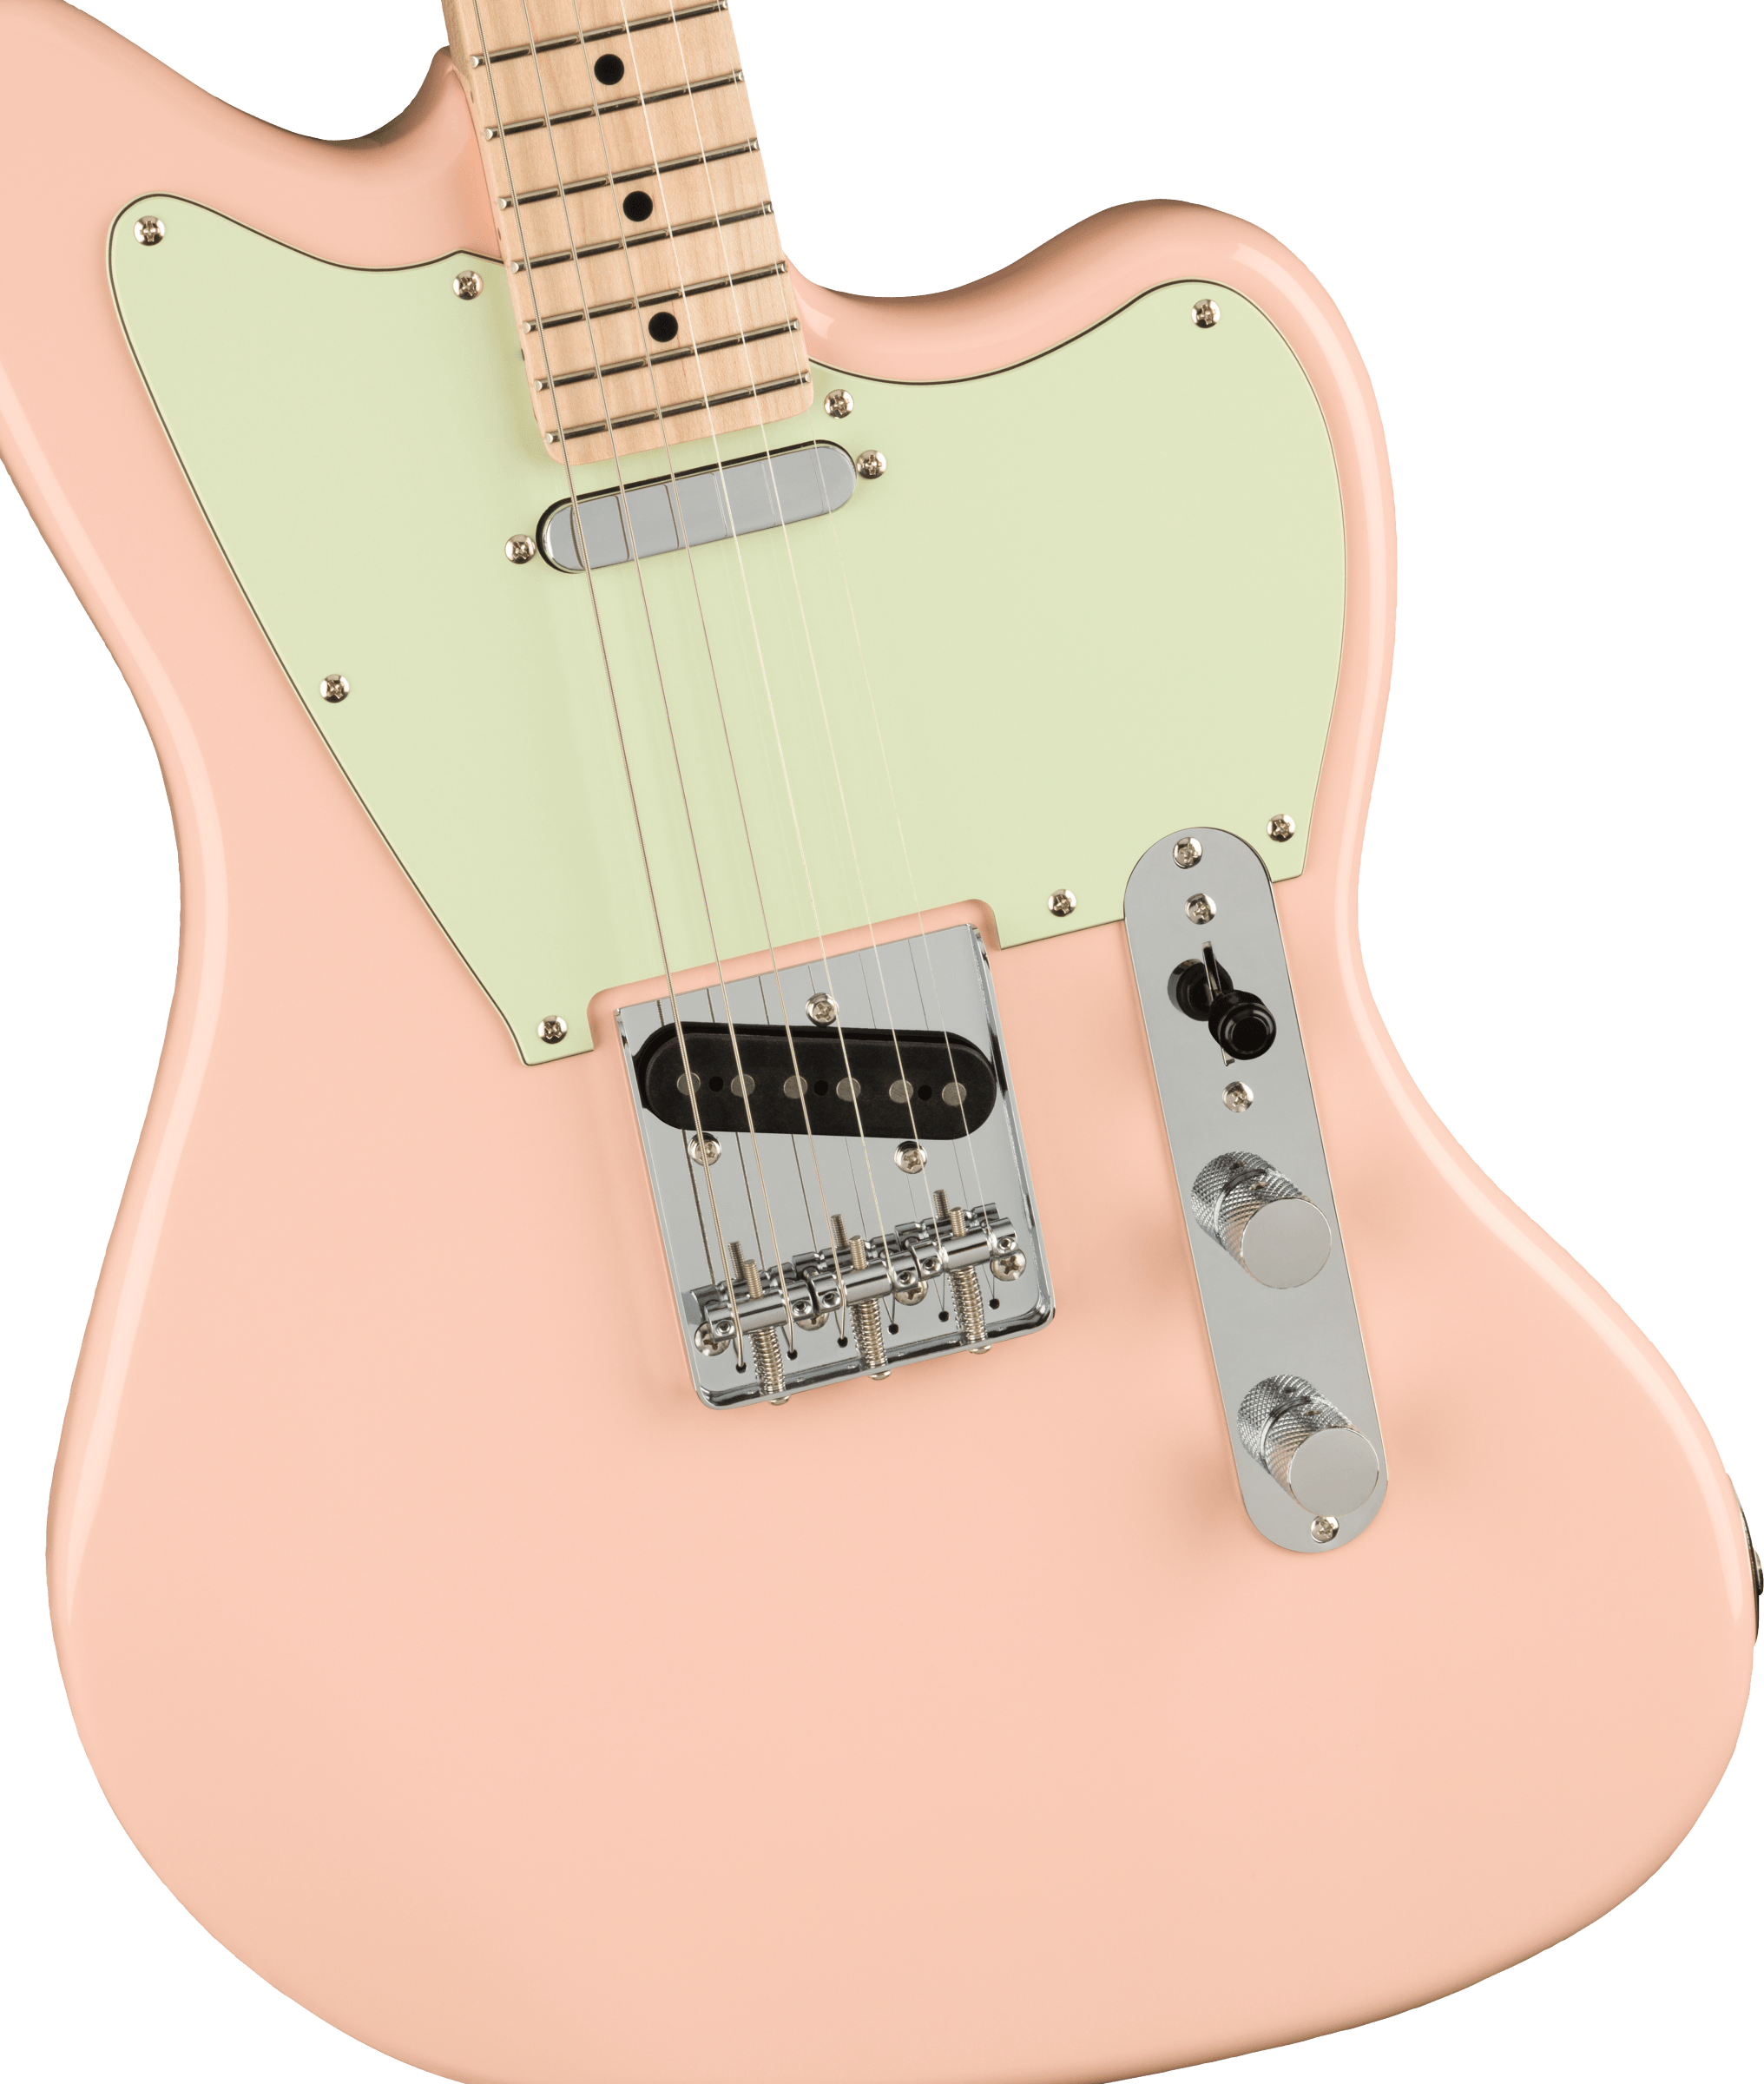 Squier Tele Offset Paranormal Ss Ht Mn - Shell Pink - Guitarra electrica retro rock - Variation 2